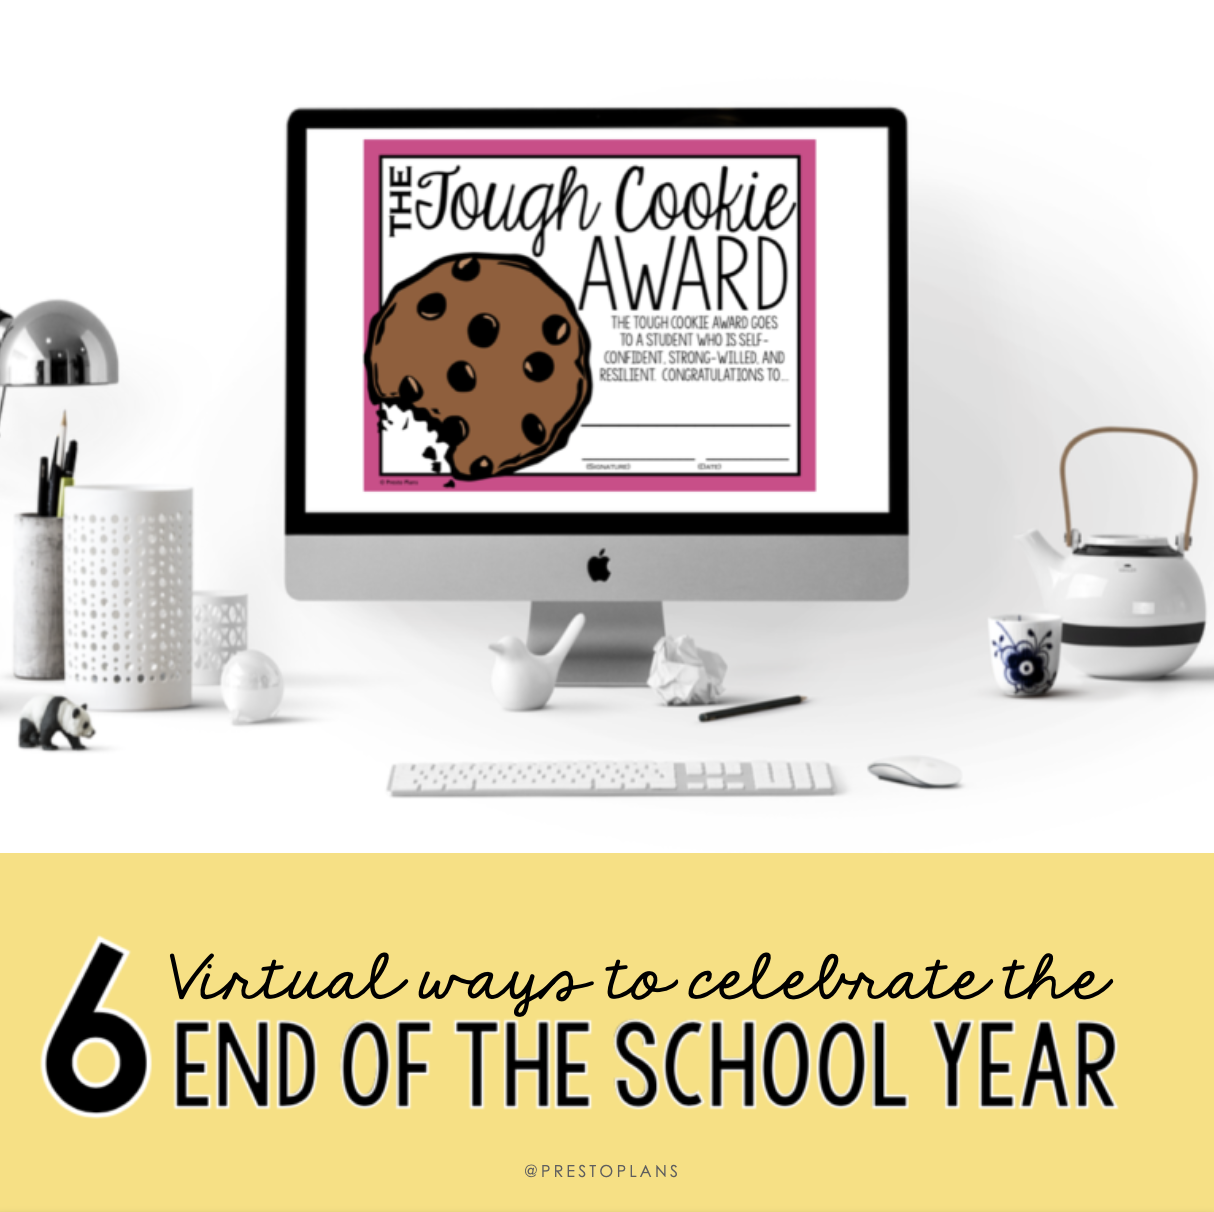 celebrate the end of the school year virtually